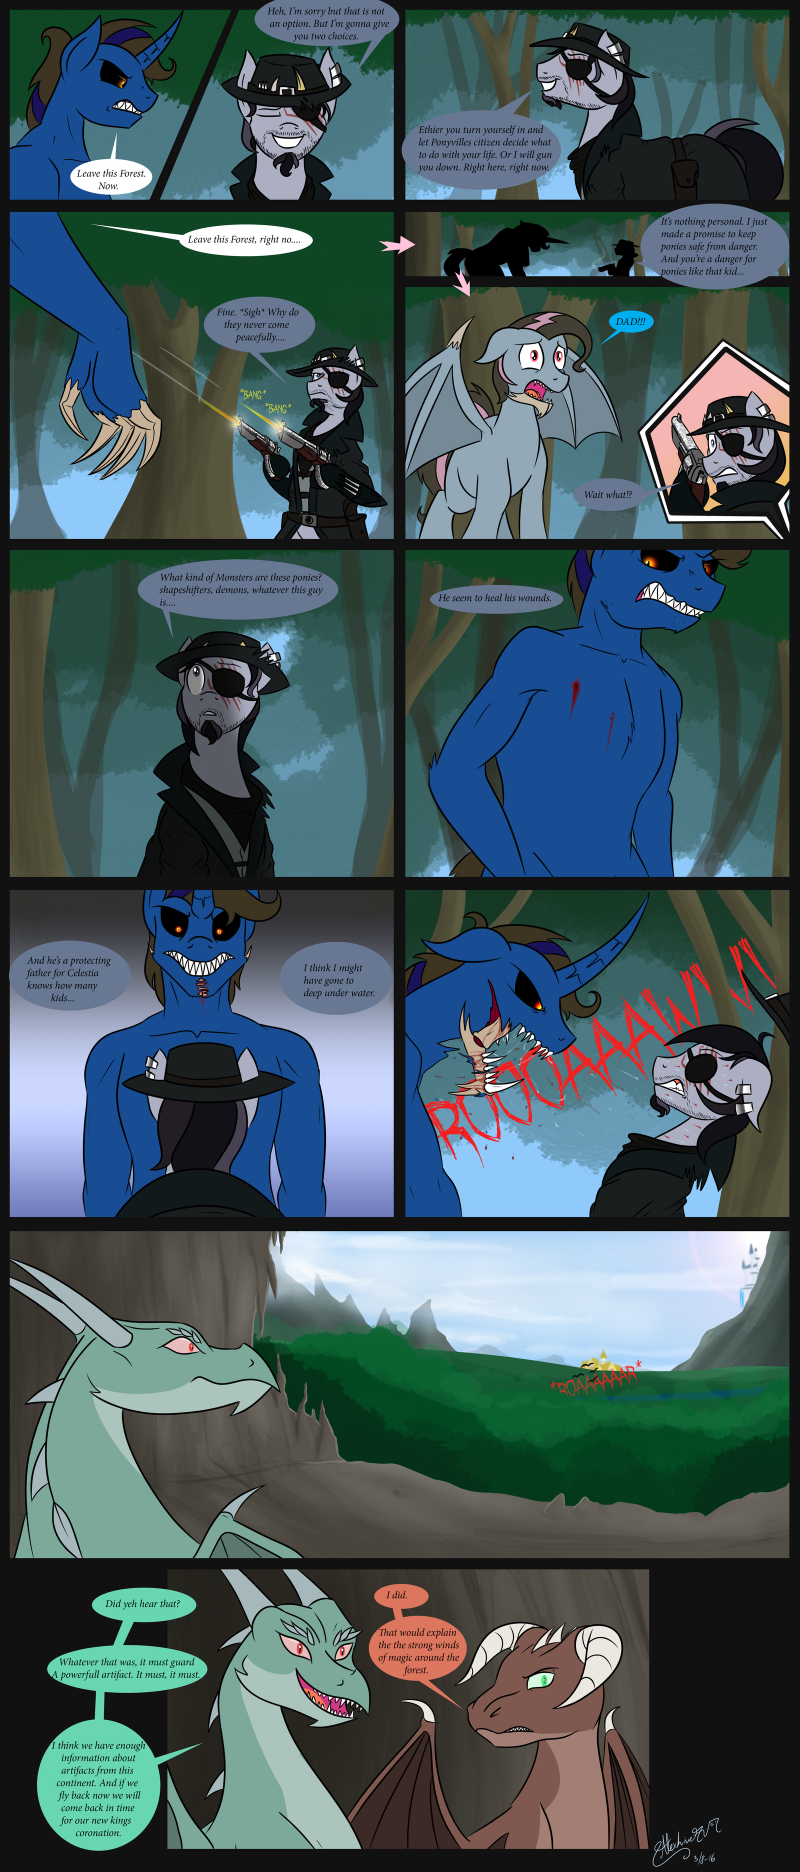 Page 18 - What kind of monster are you?